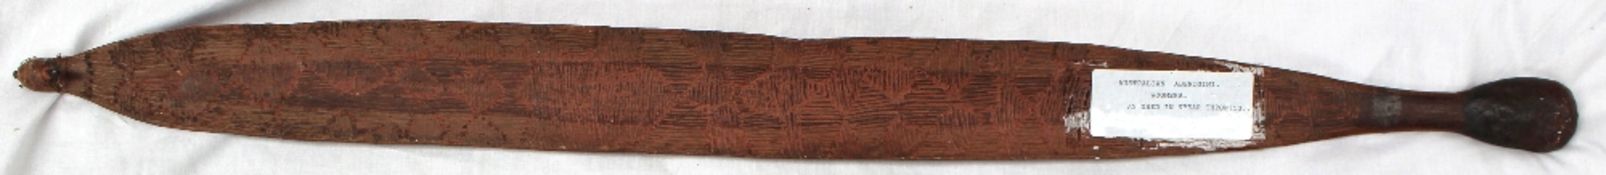 An Aboriginal Woomera spear thrower decorated with geometric line decoration, 87 cm long